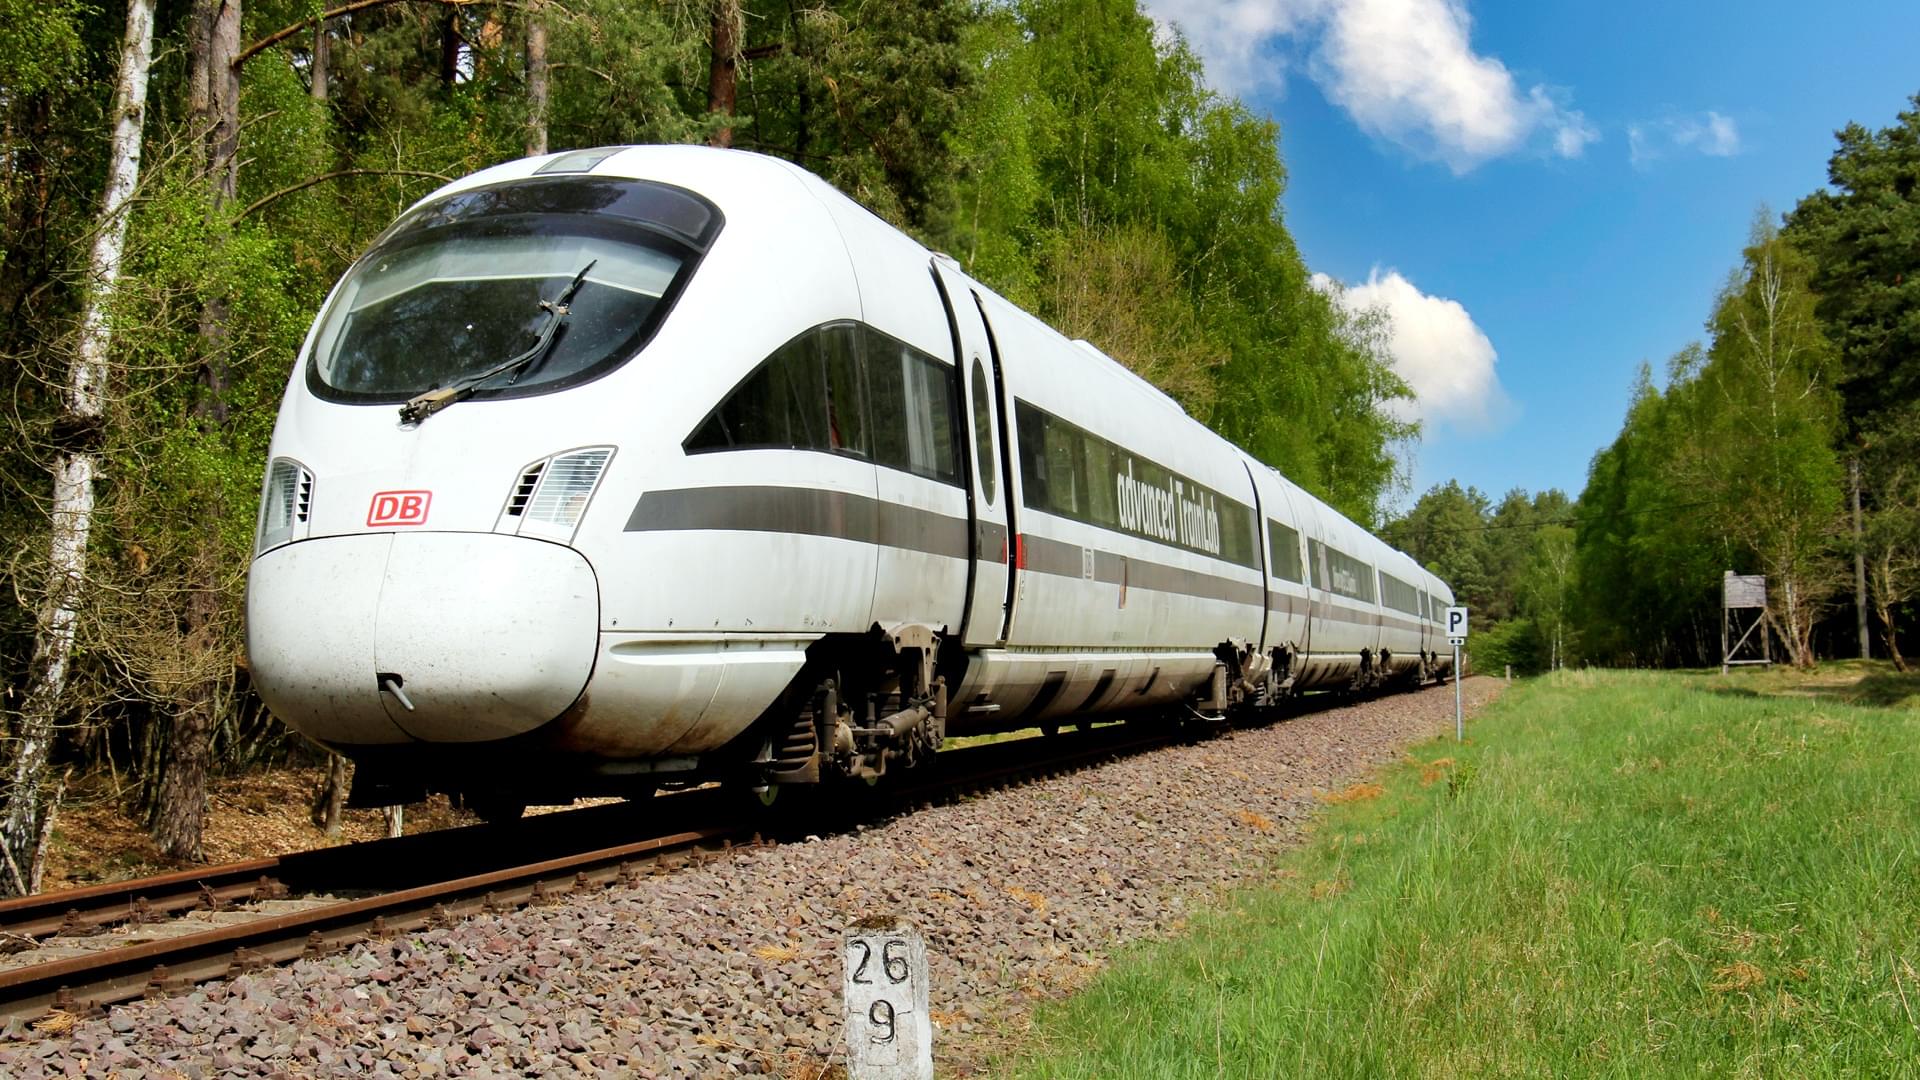 Picture of an ICE high speed train as header